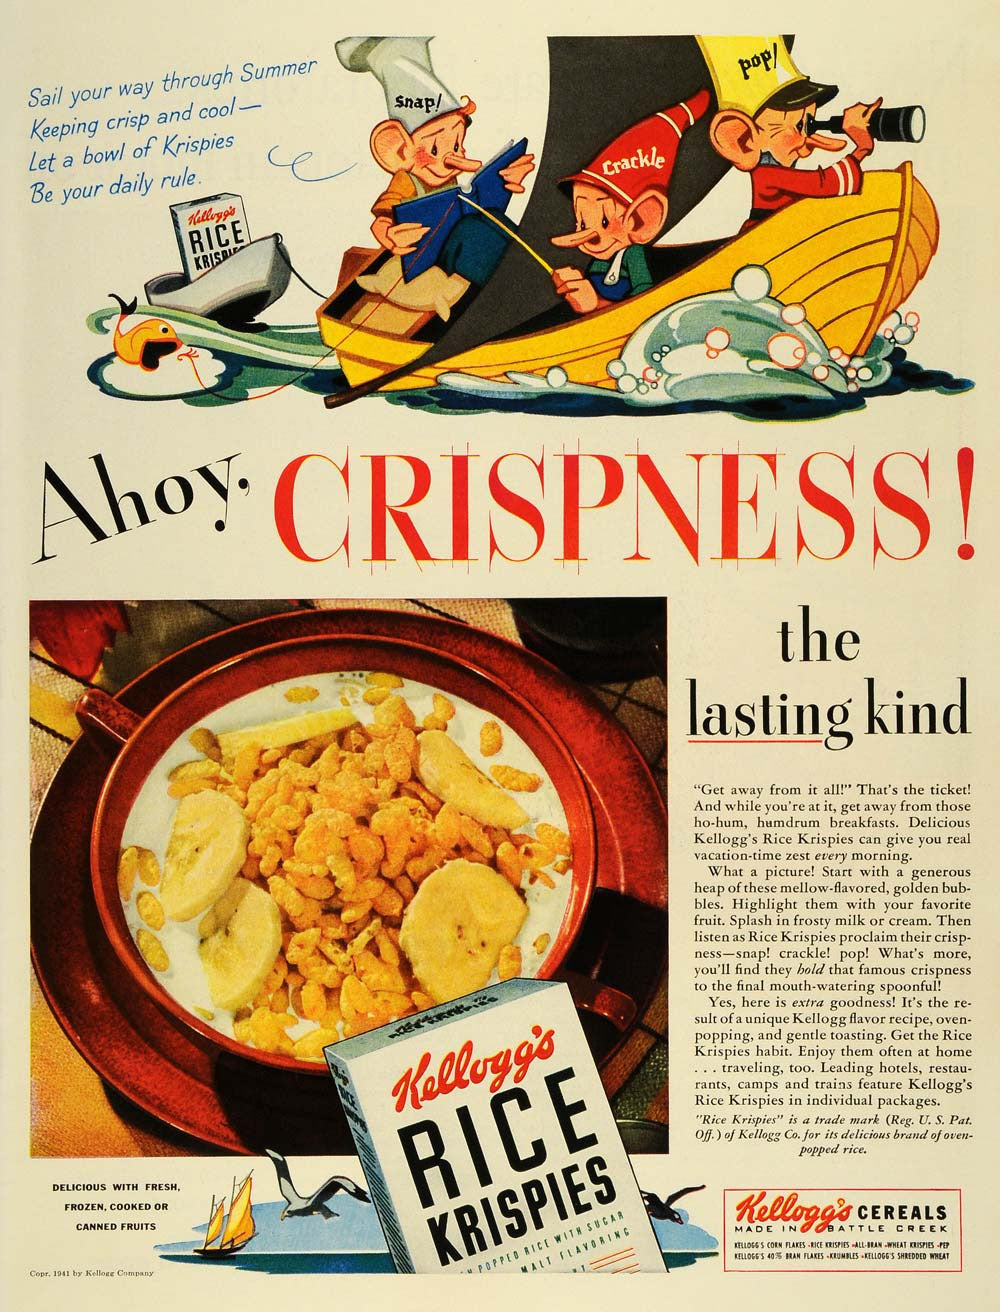 1941 Ad Kelloggs Rice Krispies Cereal Snap Crackle Pop Characters Fishing LF5 - Period Paper
